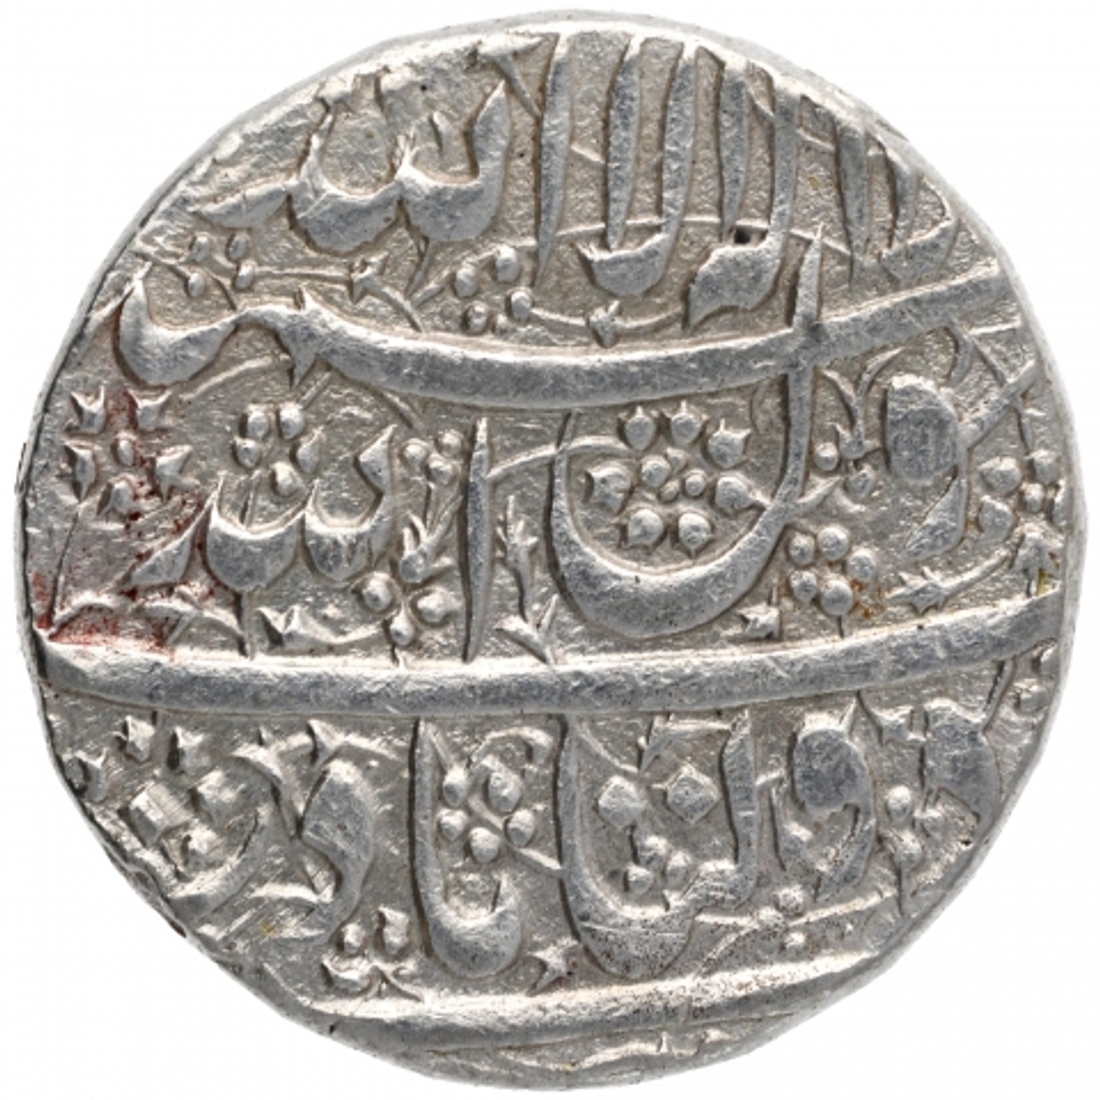 Silver Rupee Coin of Shahjahan of Daulatabad Mint.